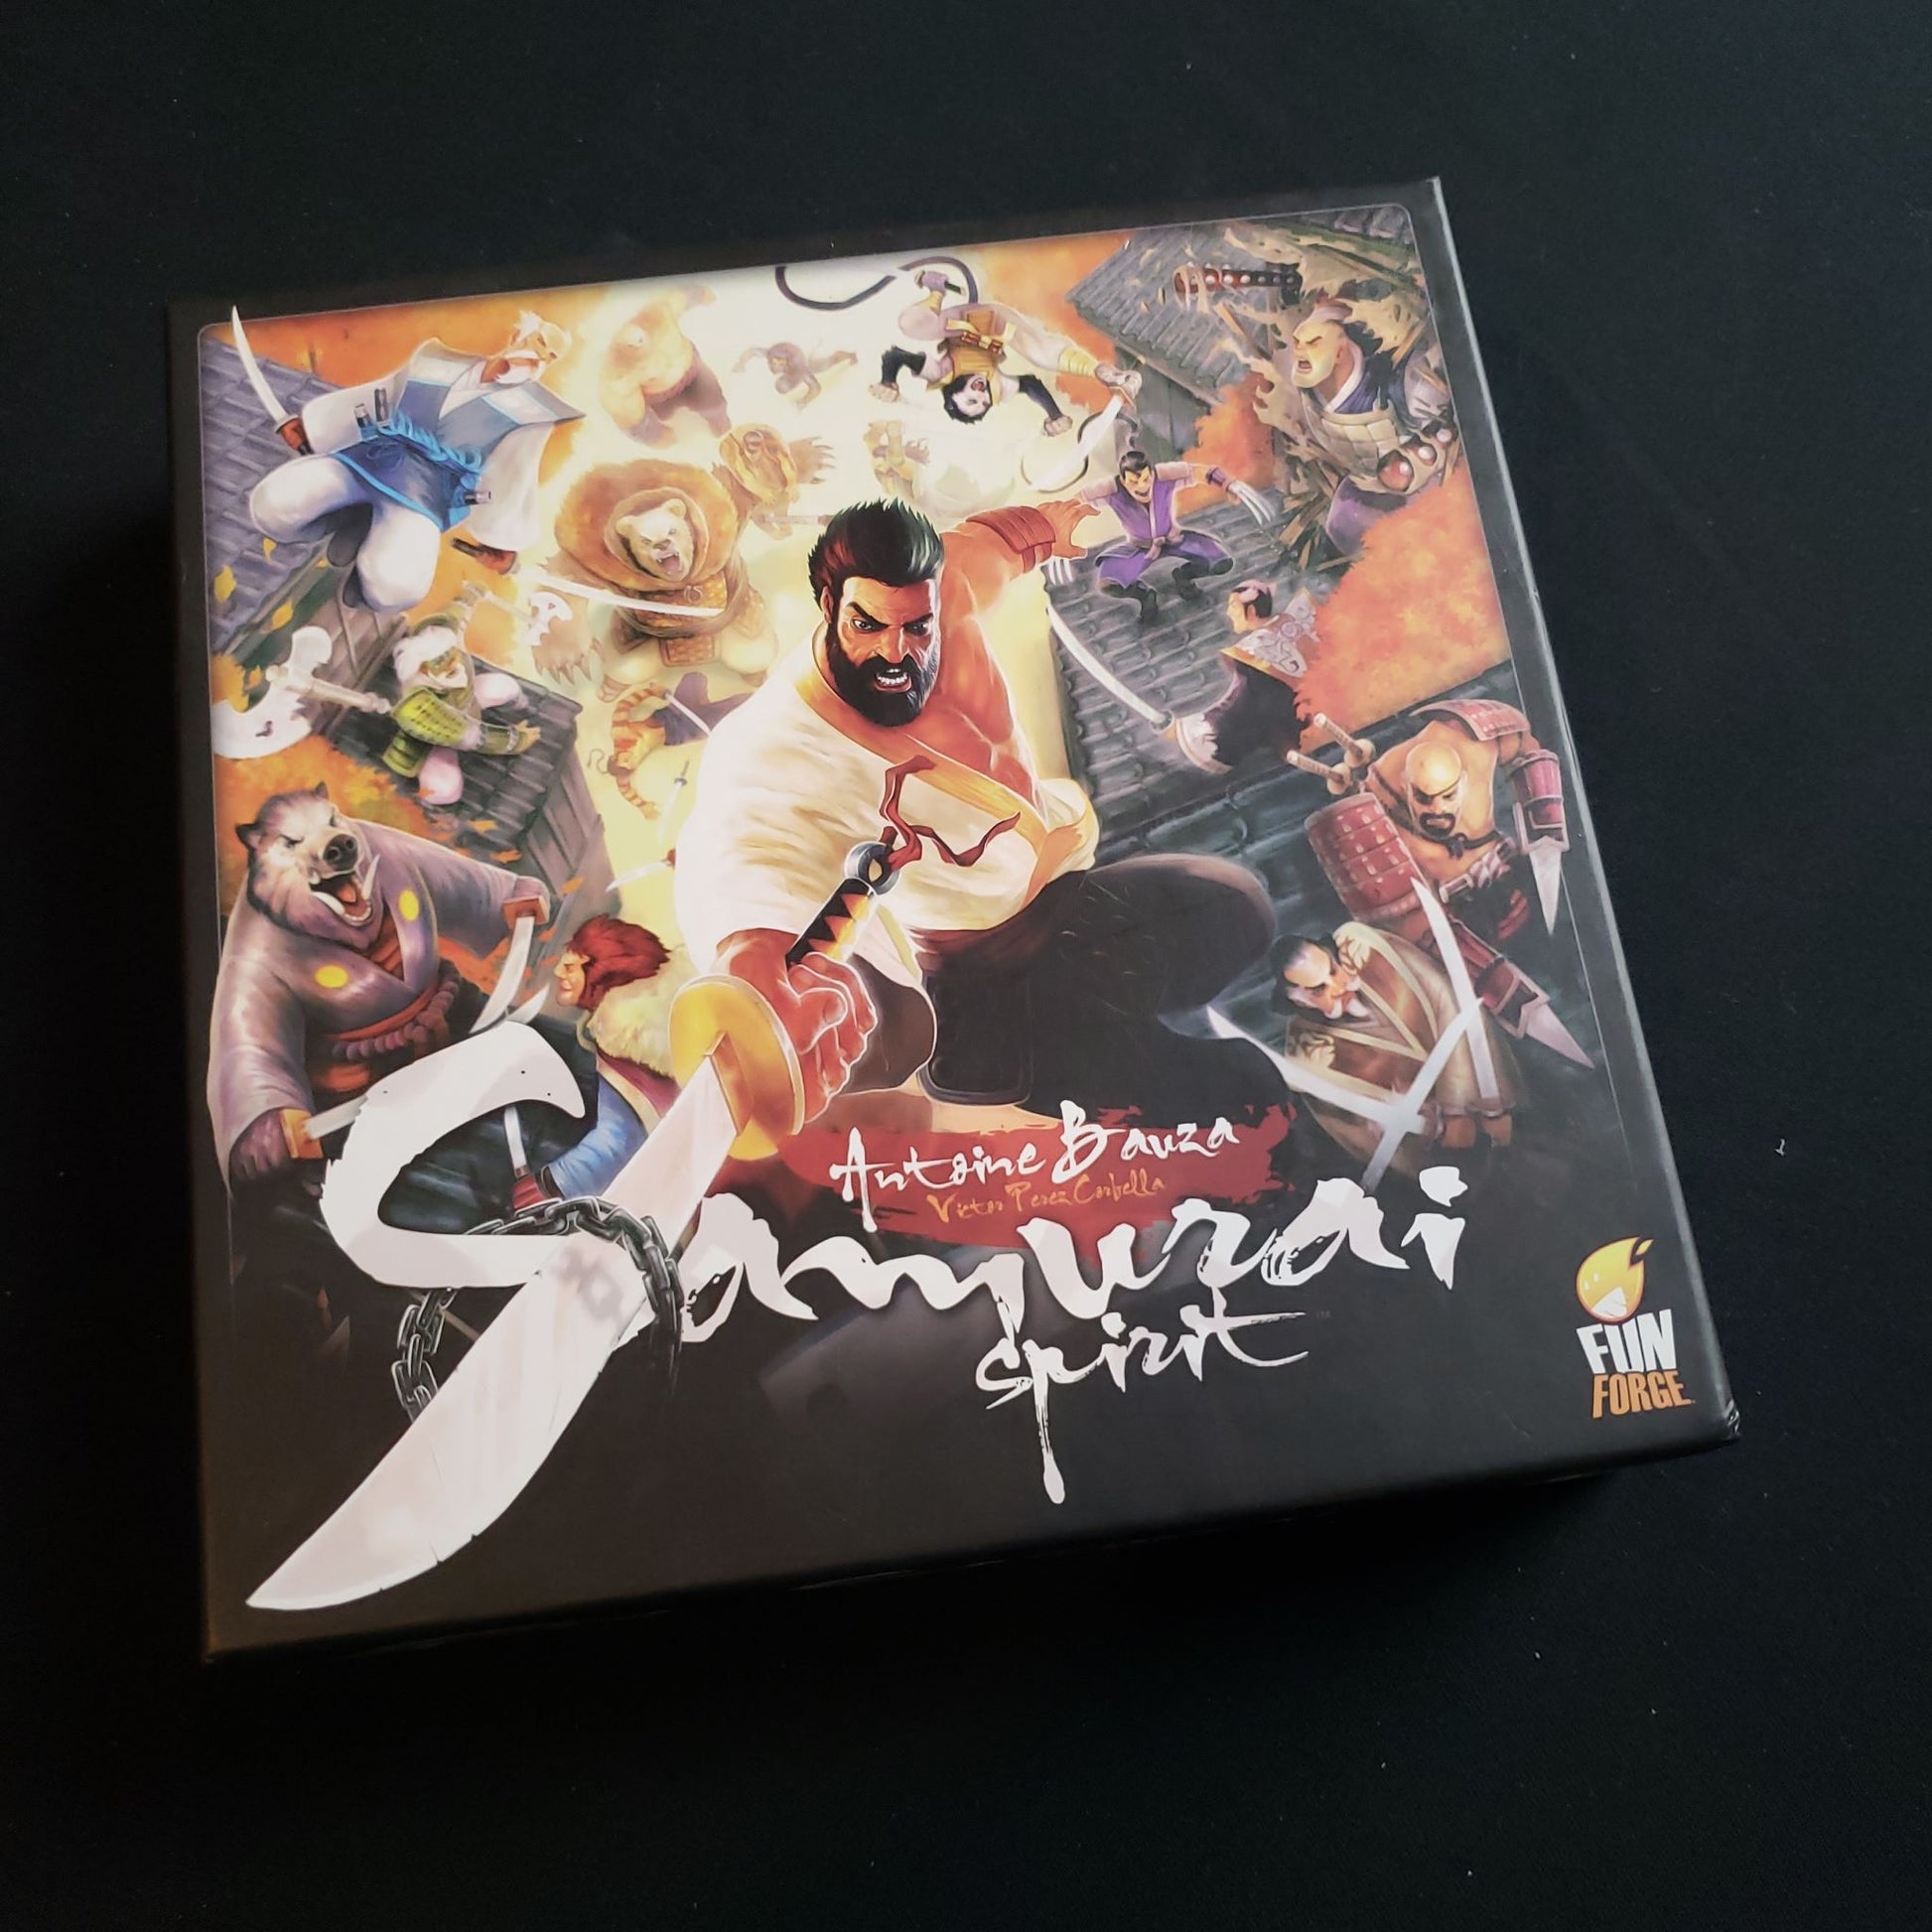 Image shows the front cover of the box of the Samurai Spirit board game